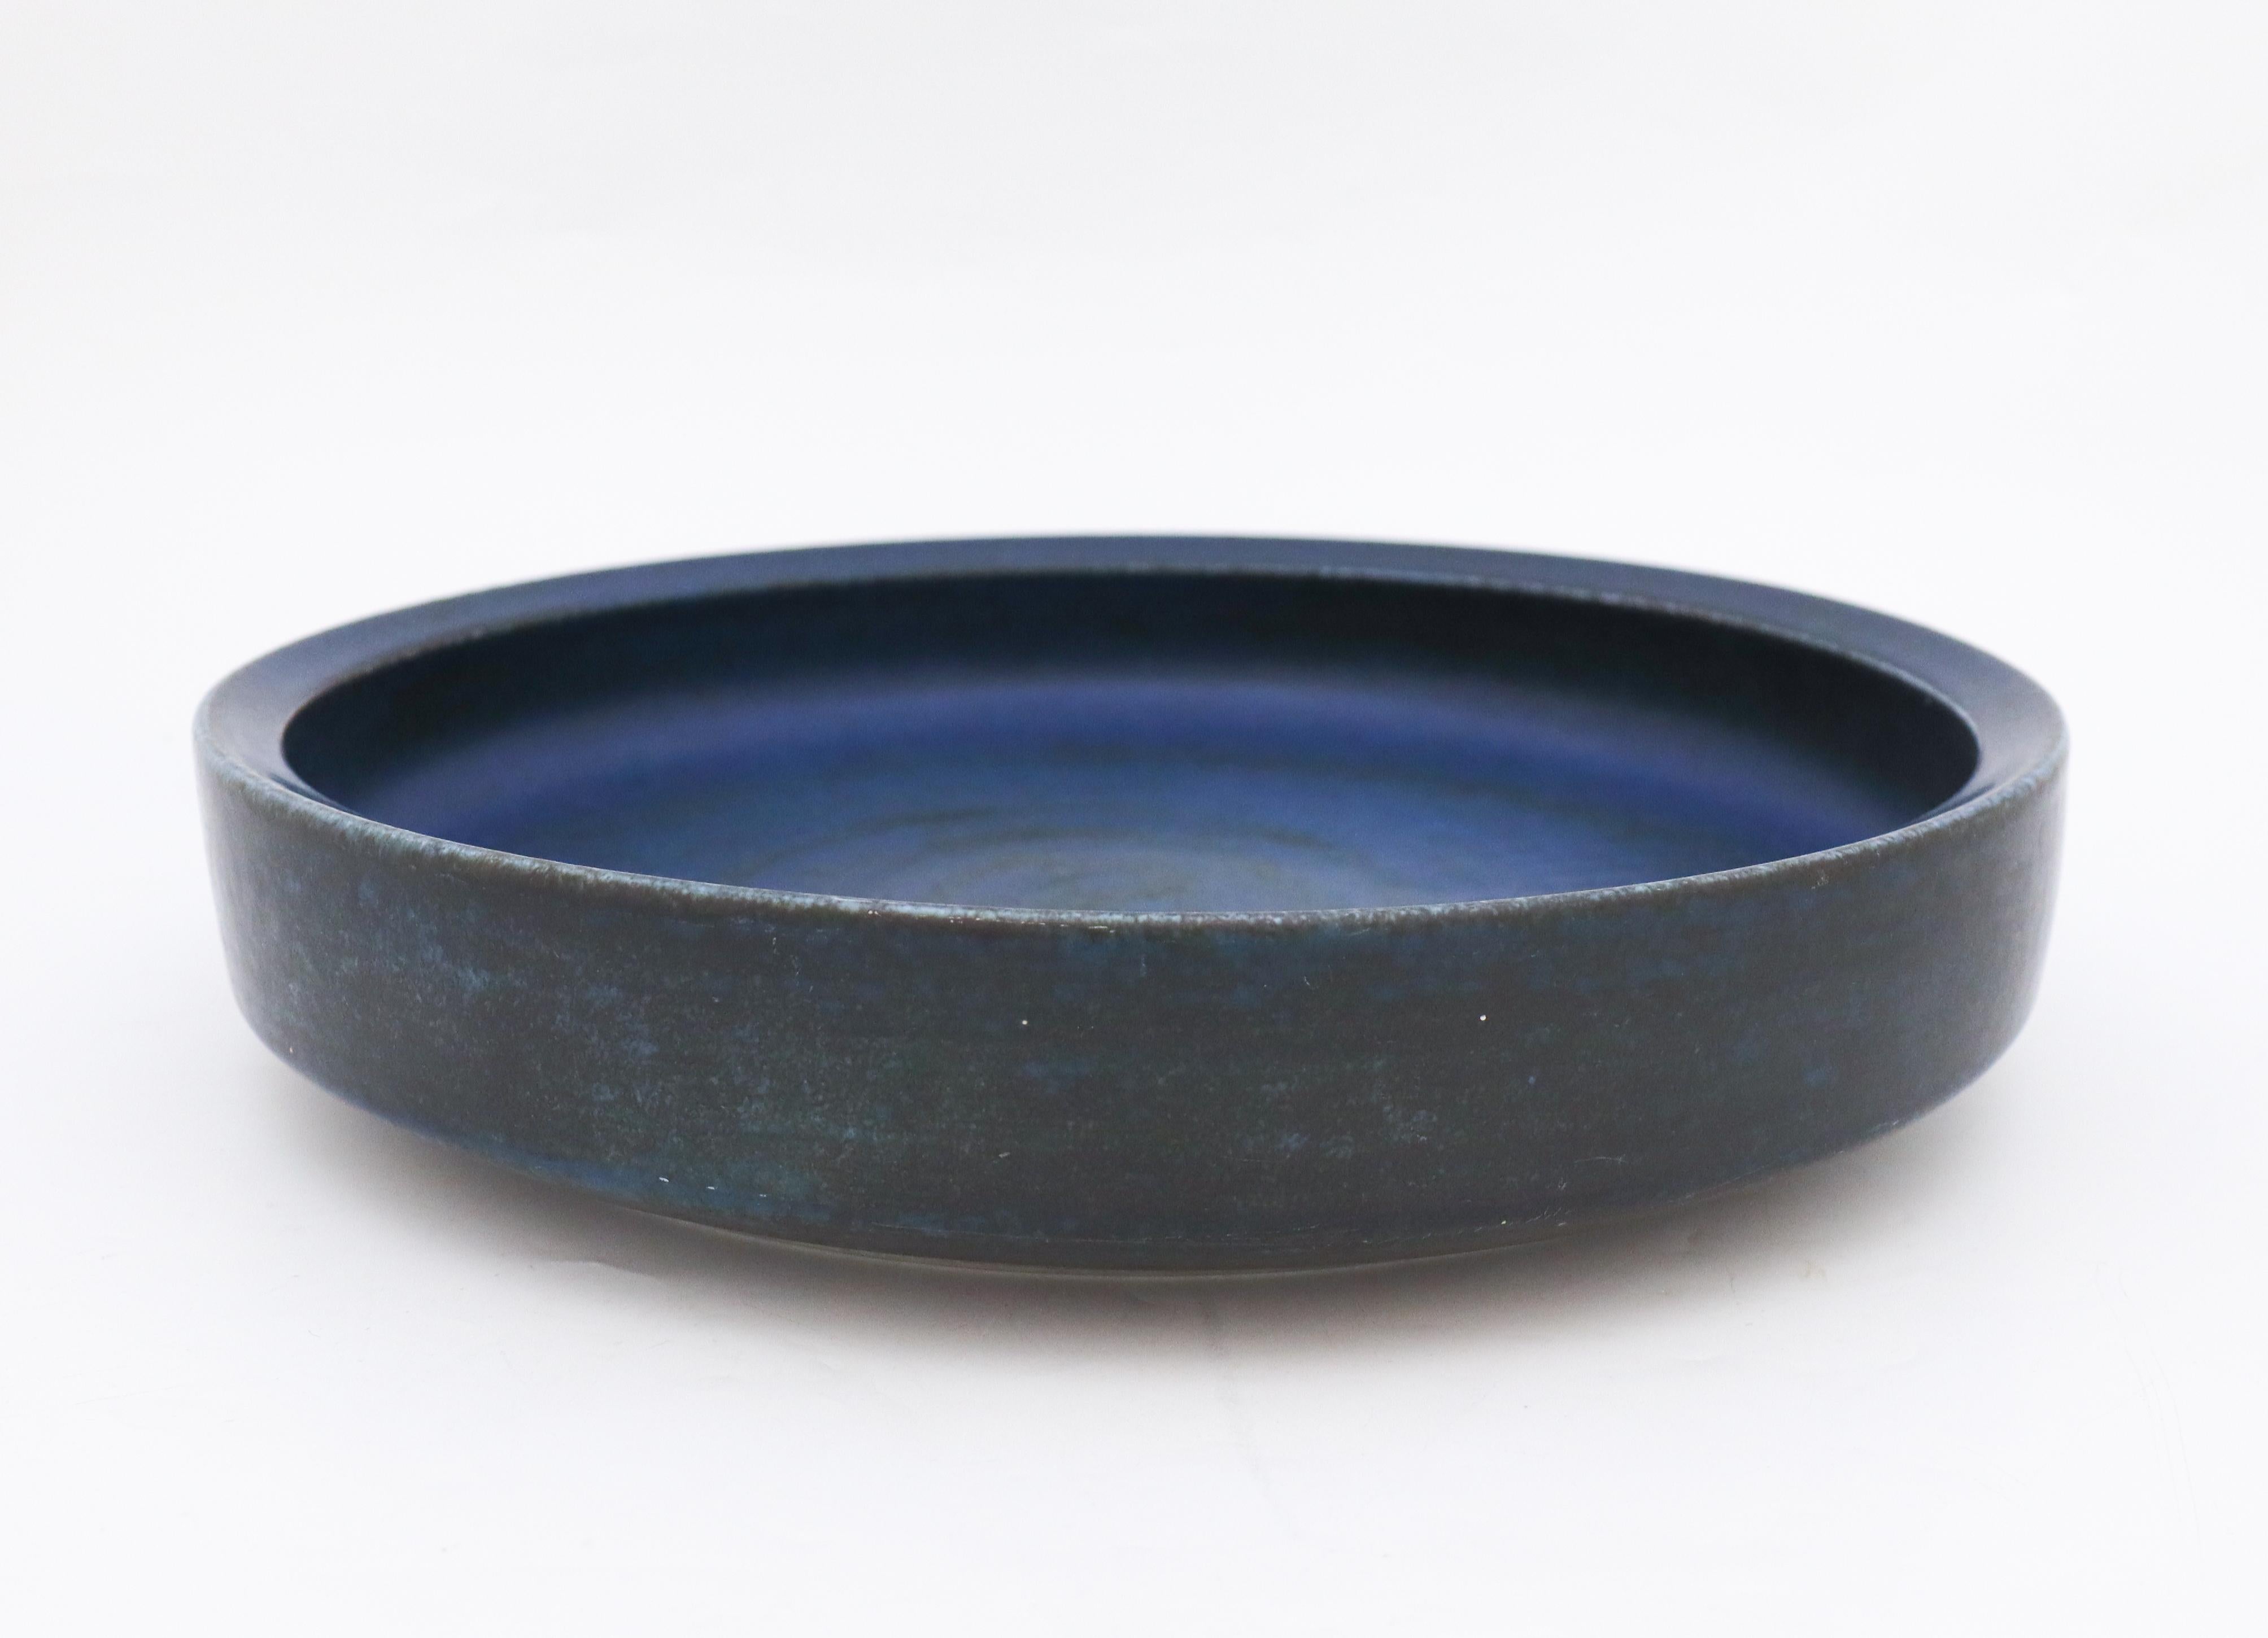 Mid-century Swedish large blue bowl from Rörstrand, designed by Carl-Harry Stålhane. It is 38 cm (15.2